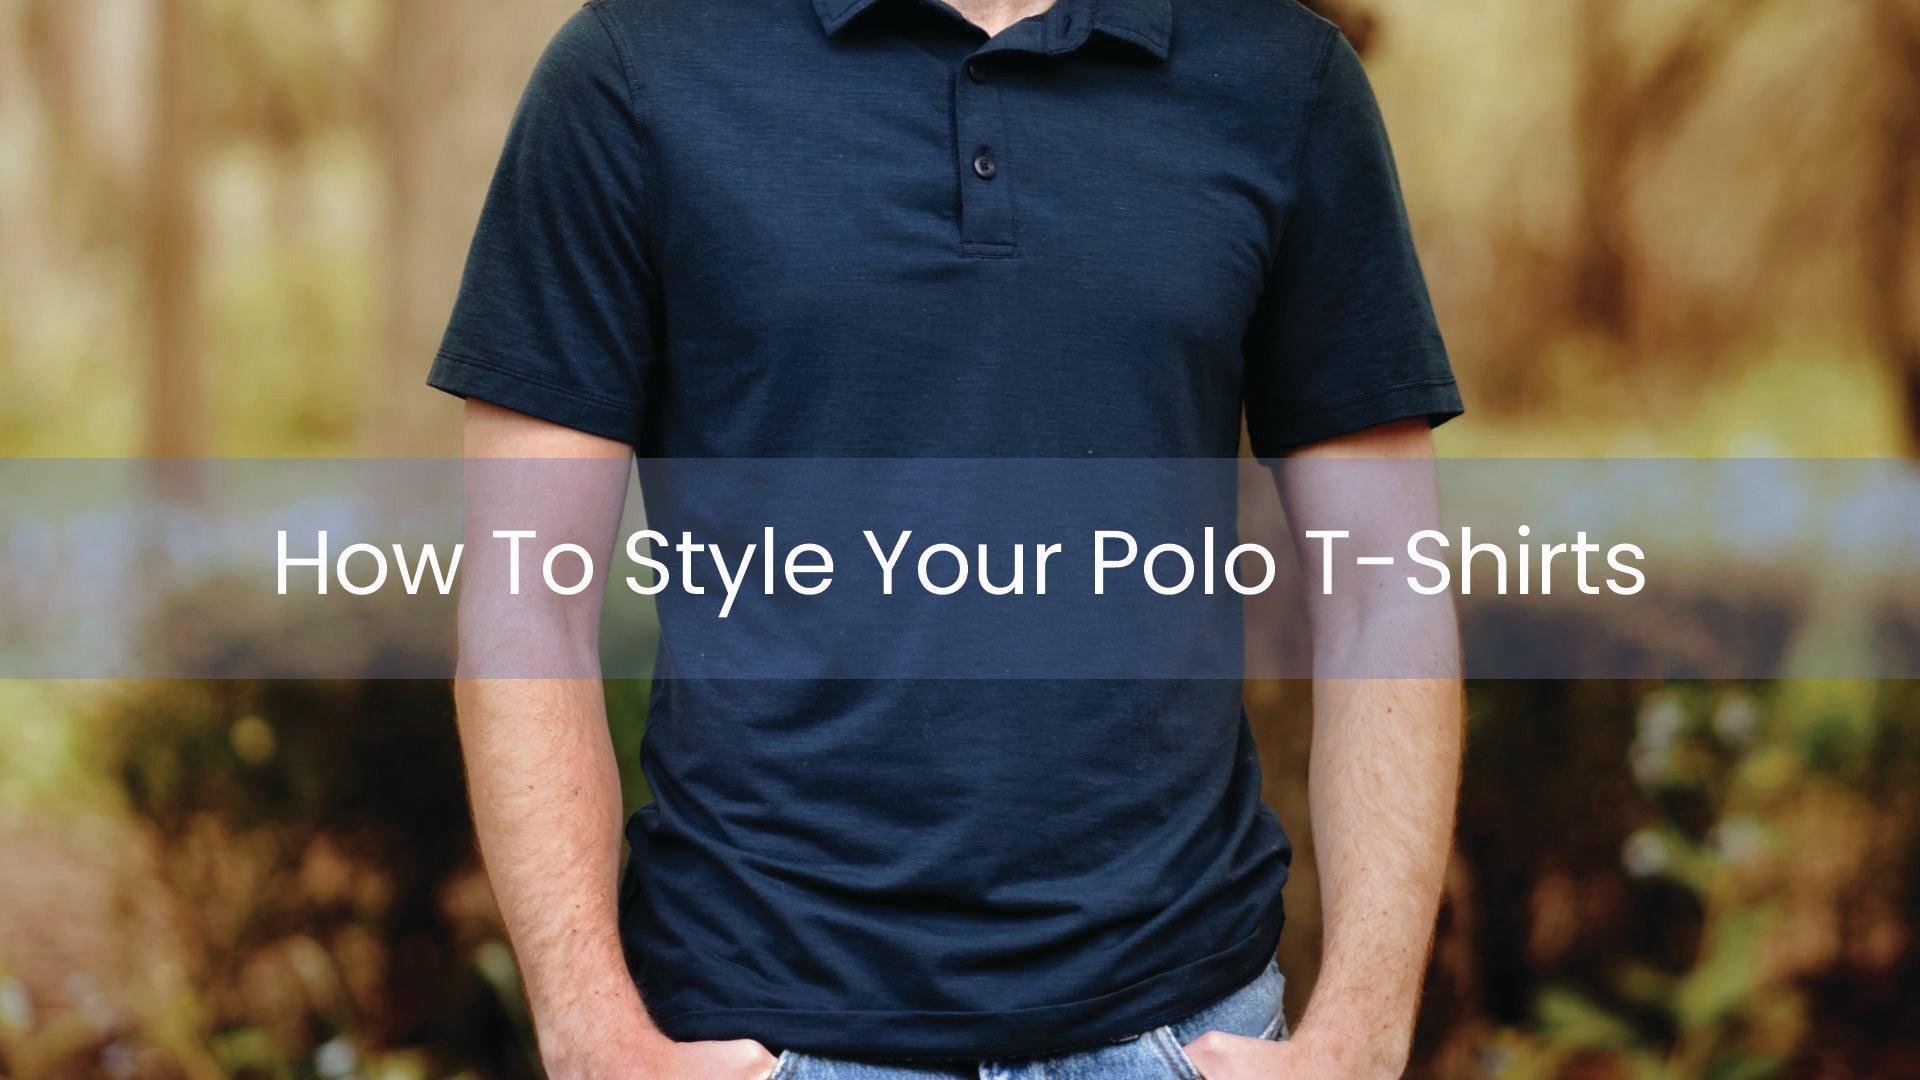 How To Style Your Polo T-Shirts